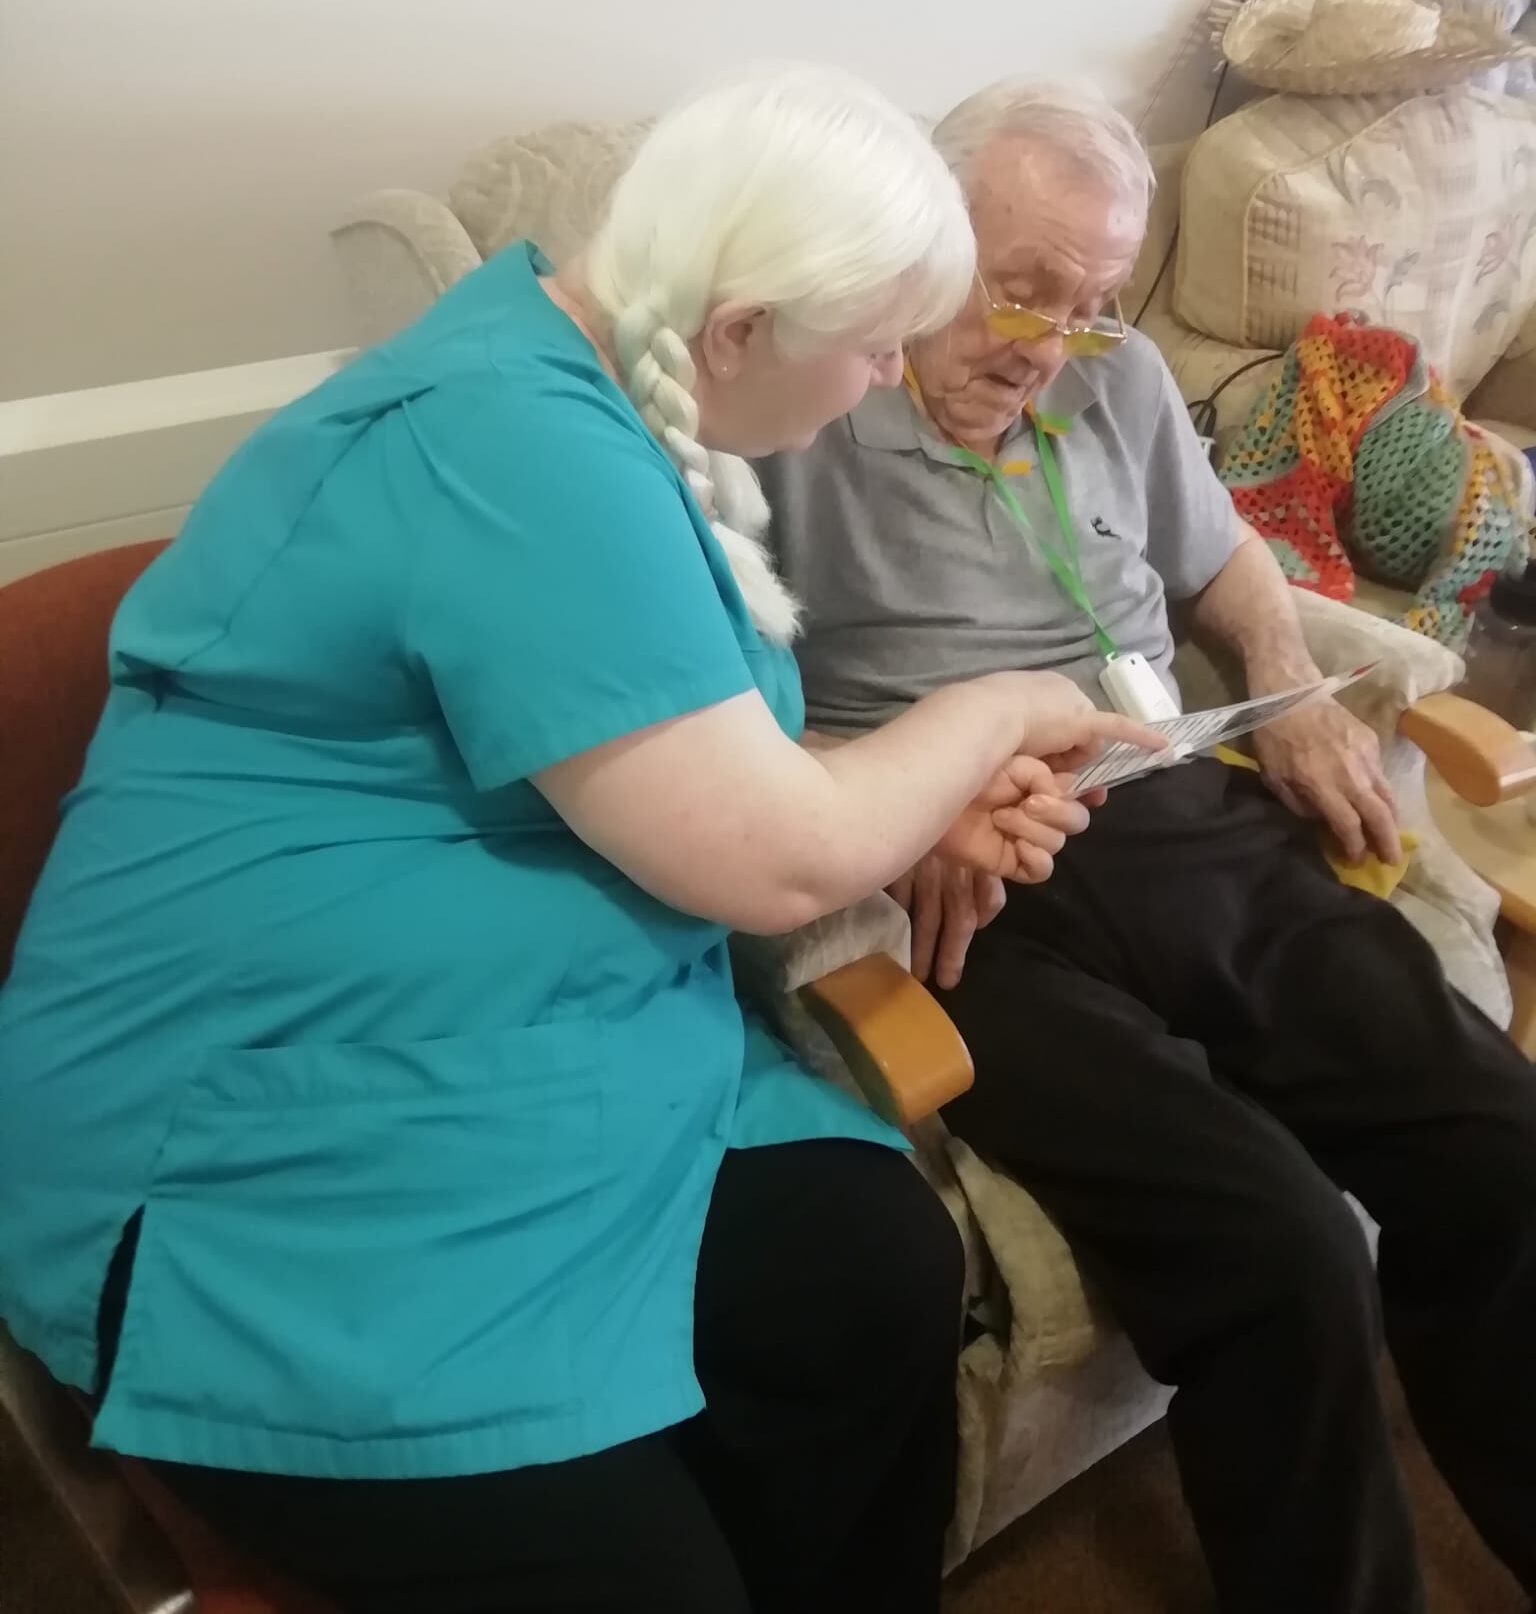 A woman in a turquoise uniform top and blond hair in long braided pigtails is showing a gentleman a picture of something and they are discussing it together